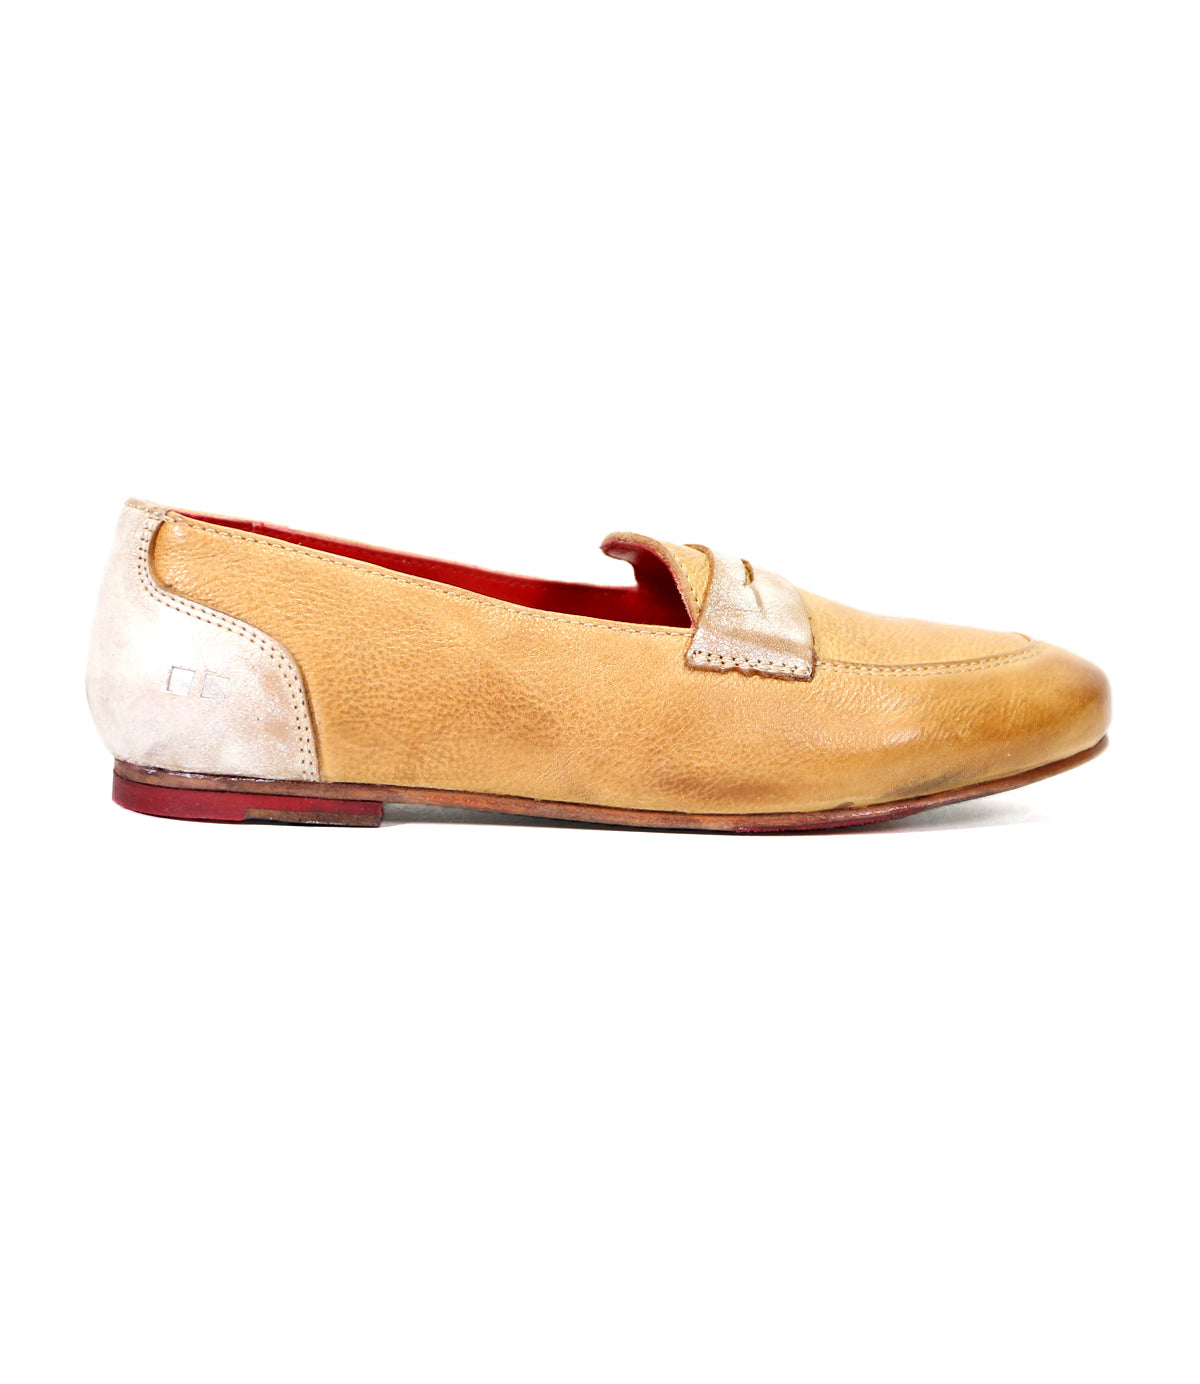 A single Bed Stu beige leather penny loafer with a red interior and a small metal emblem on the side, displayed against a white background.